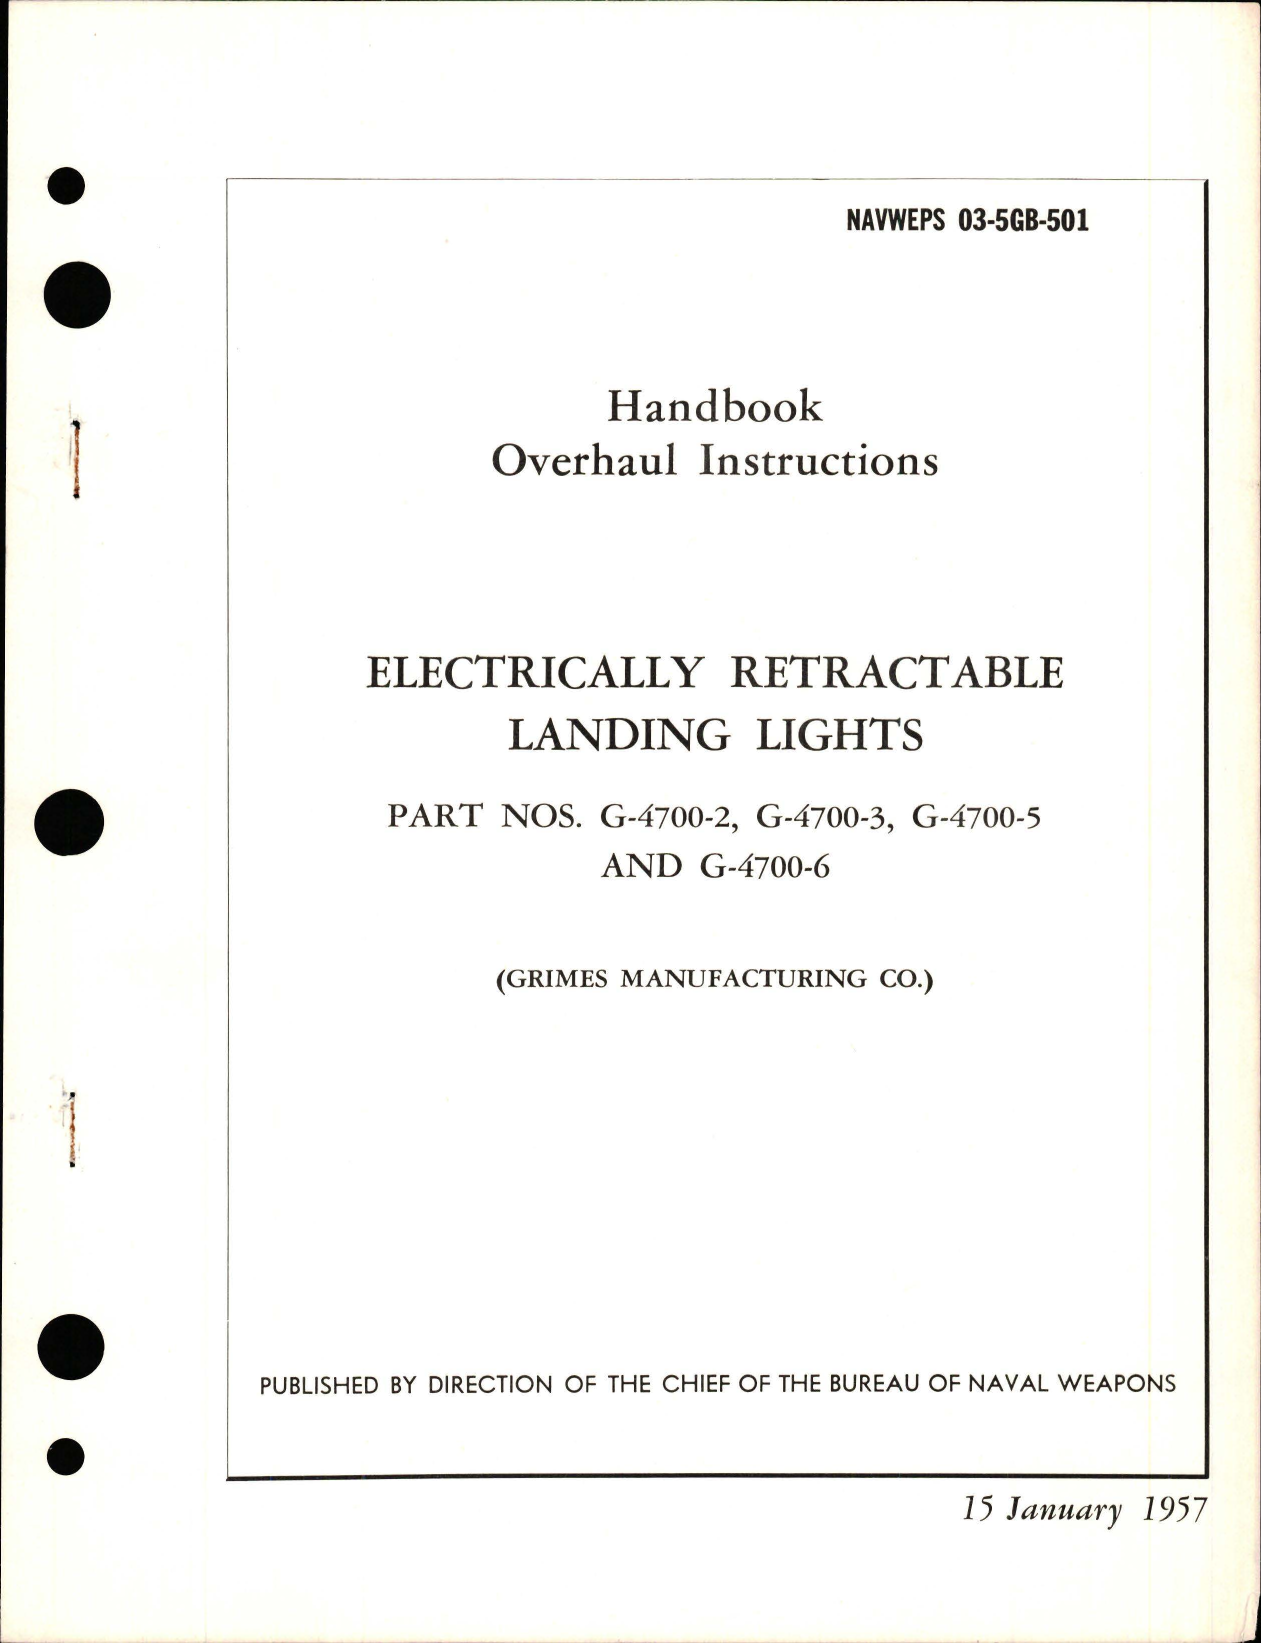 Sample page 1 from AirCorps Library document: Overhaul Instructions for Electrically Retractable Landing Lights - Parts G-4700-2, G-4700-3, G-4700-5, and G-4700-6